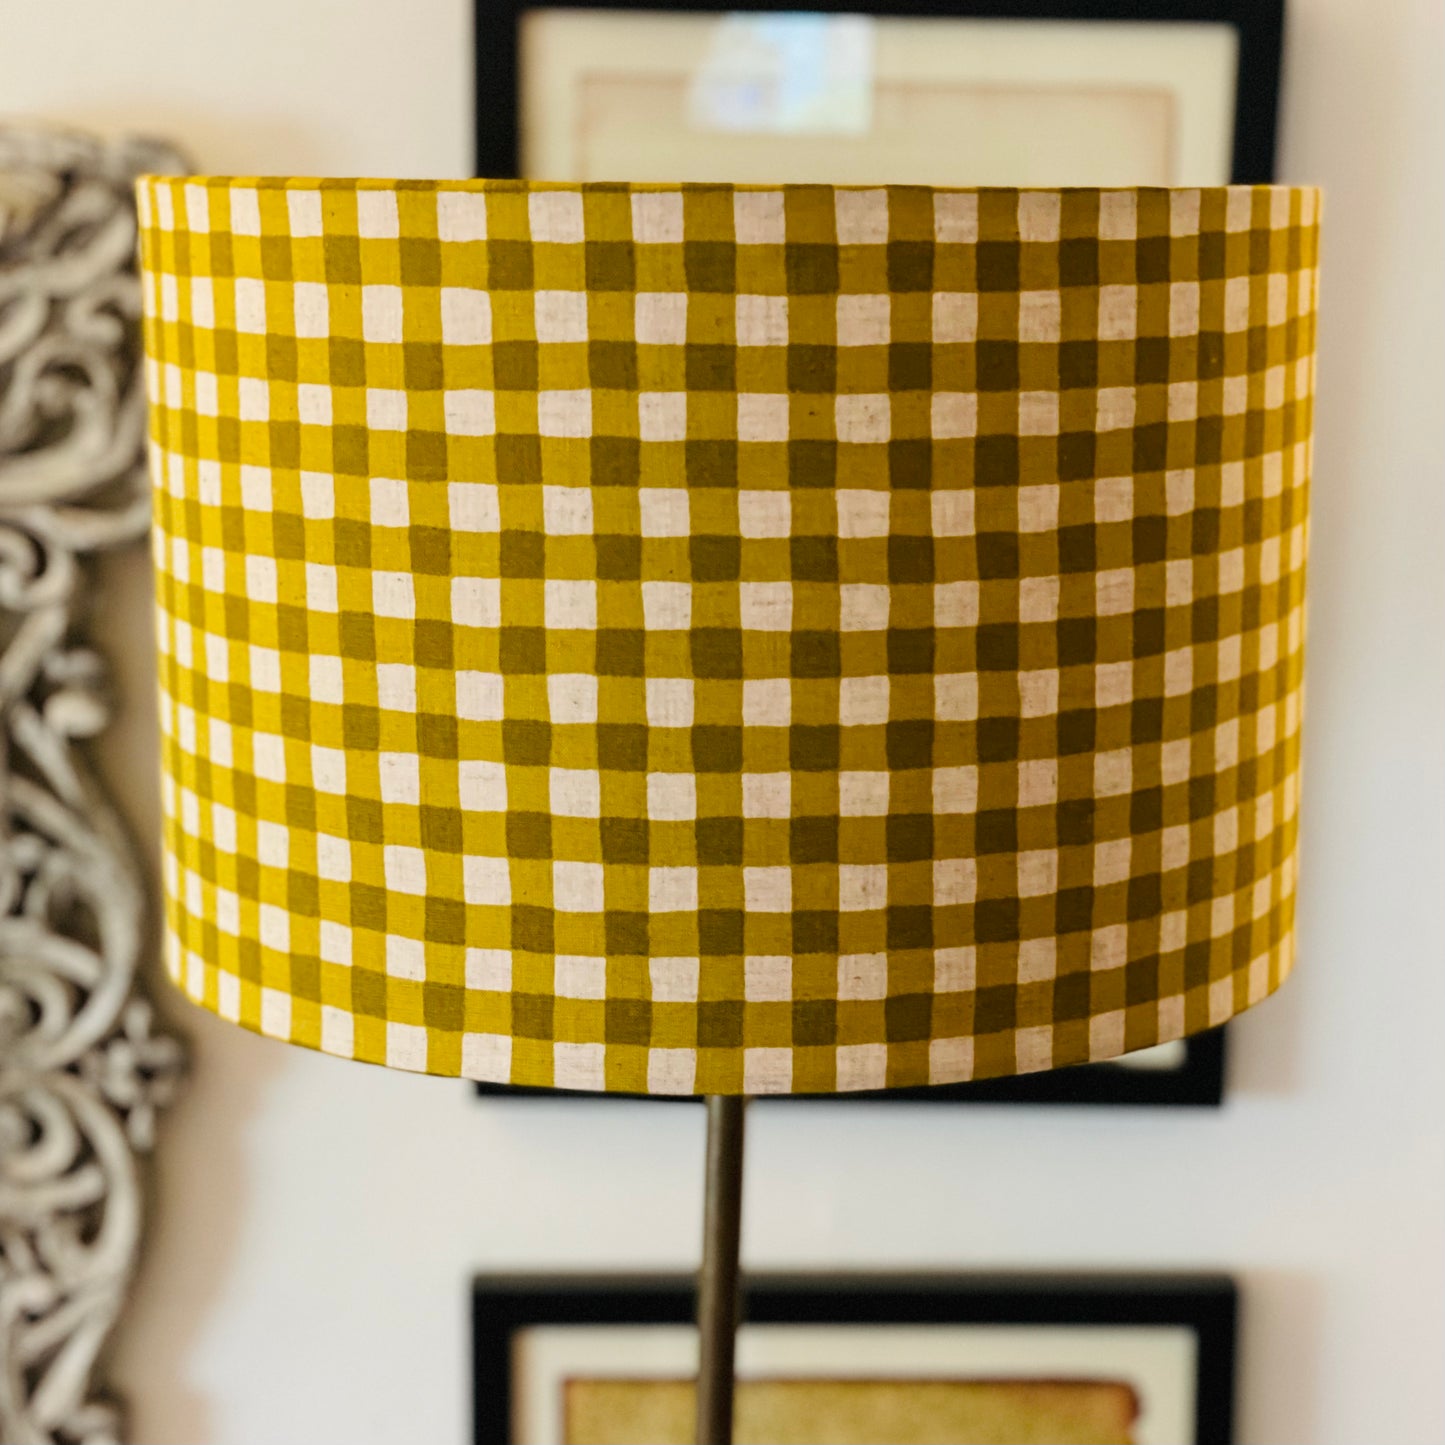 12 Inch Drum Shade. Yellow-Green Gingham Cotton-Linen from Japan.